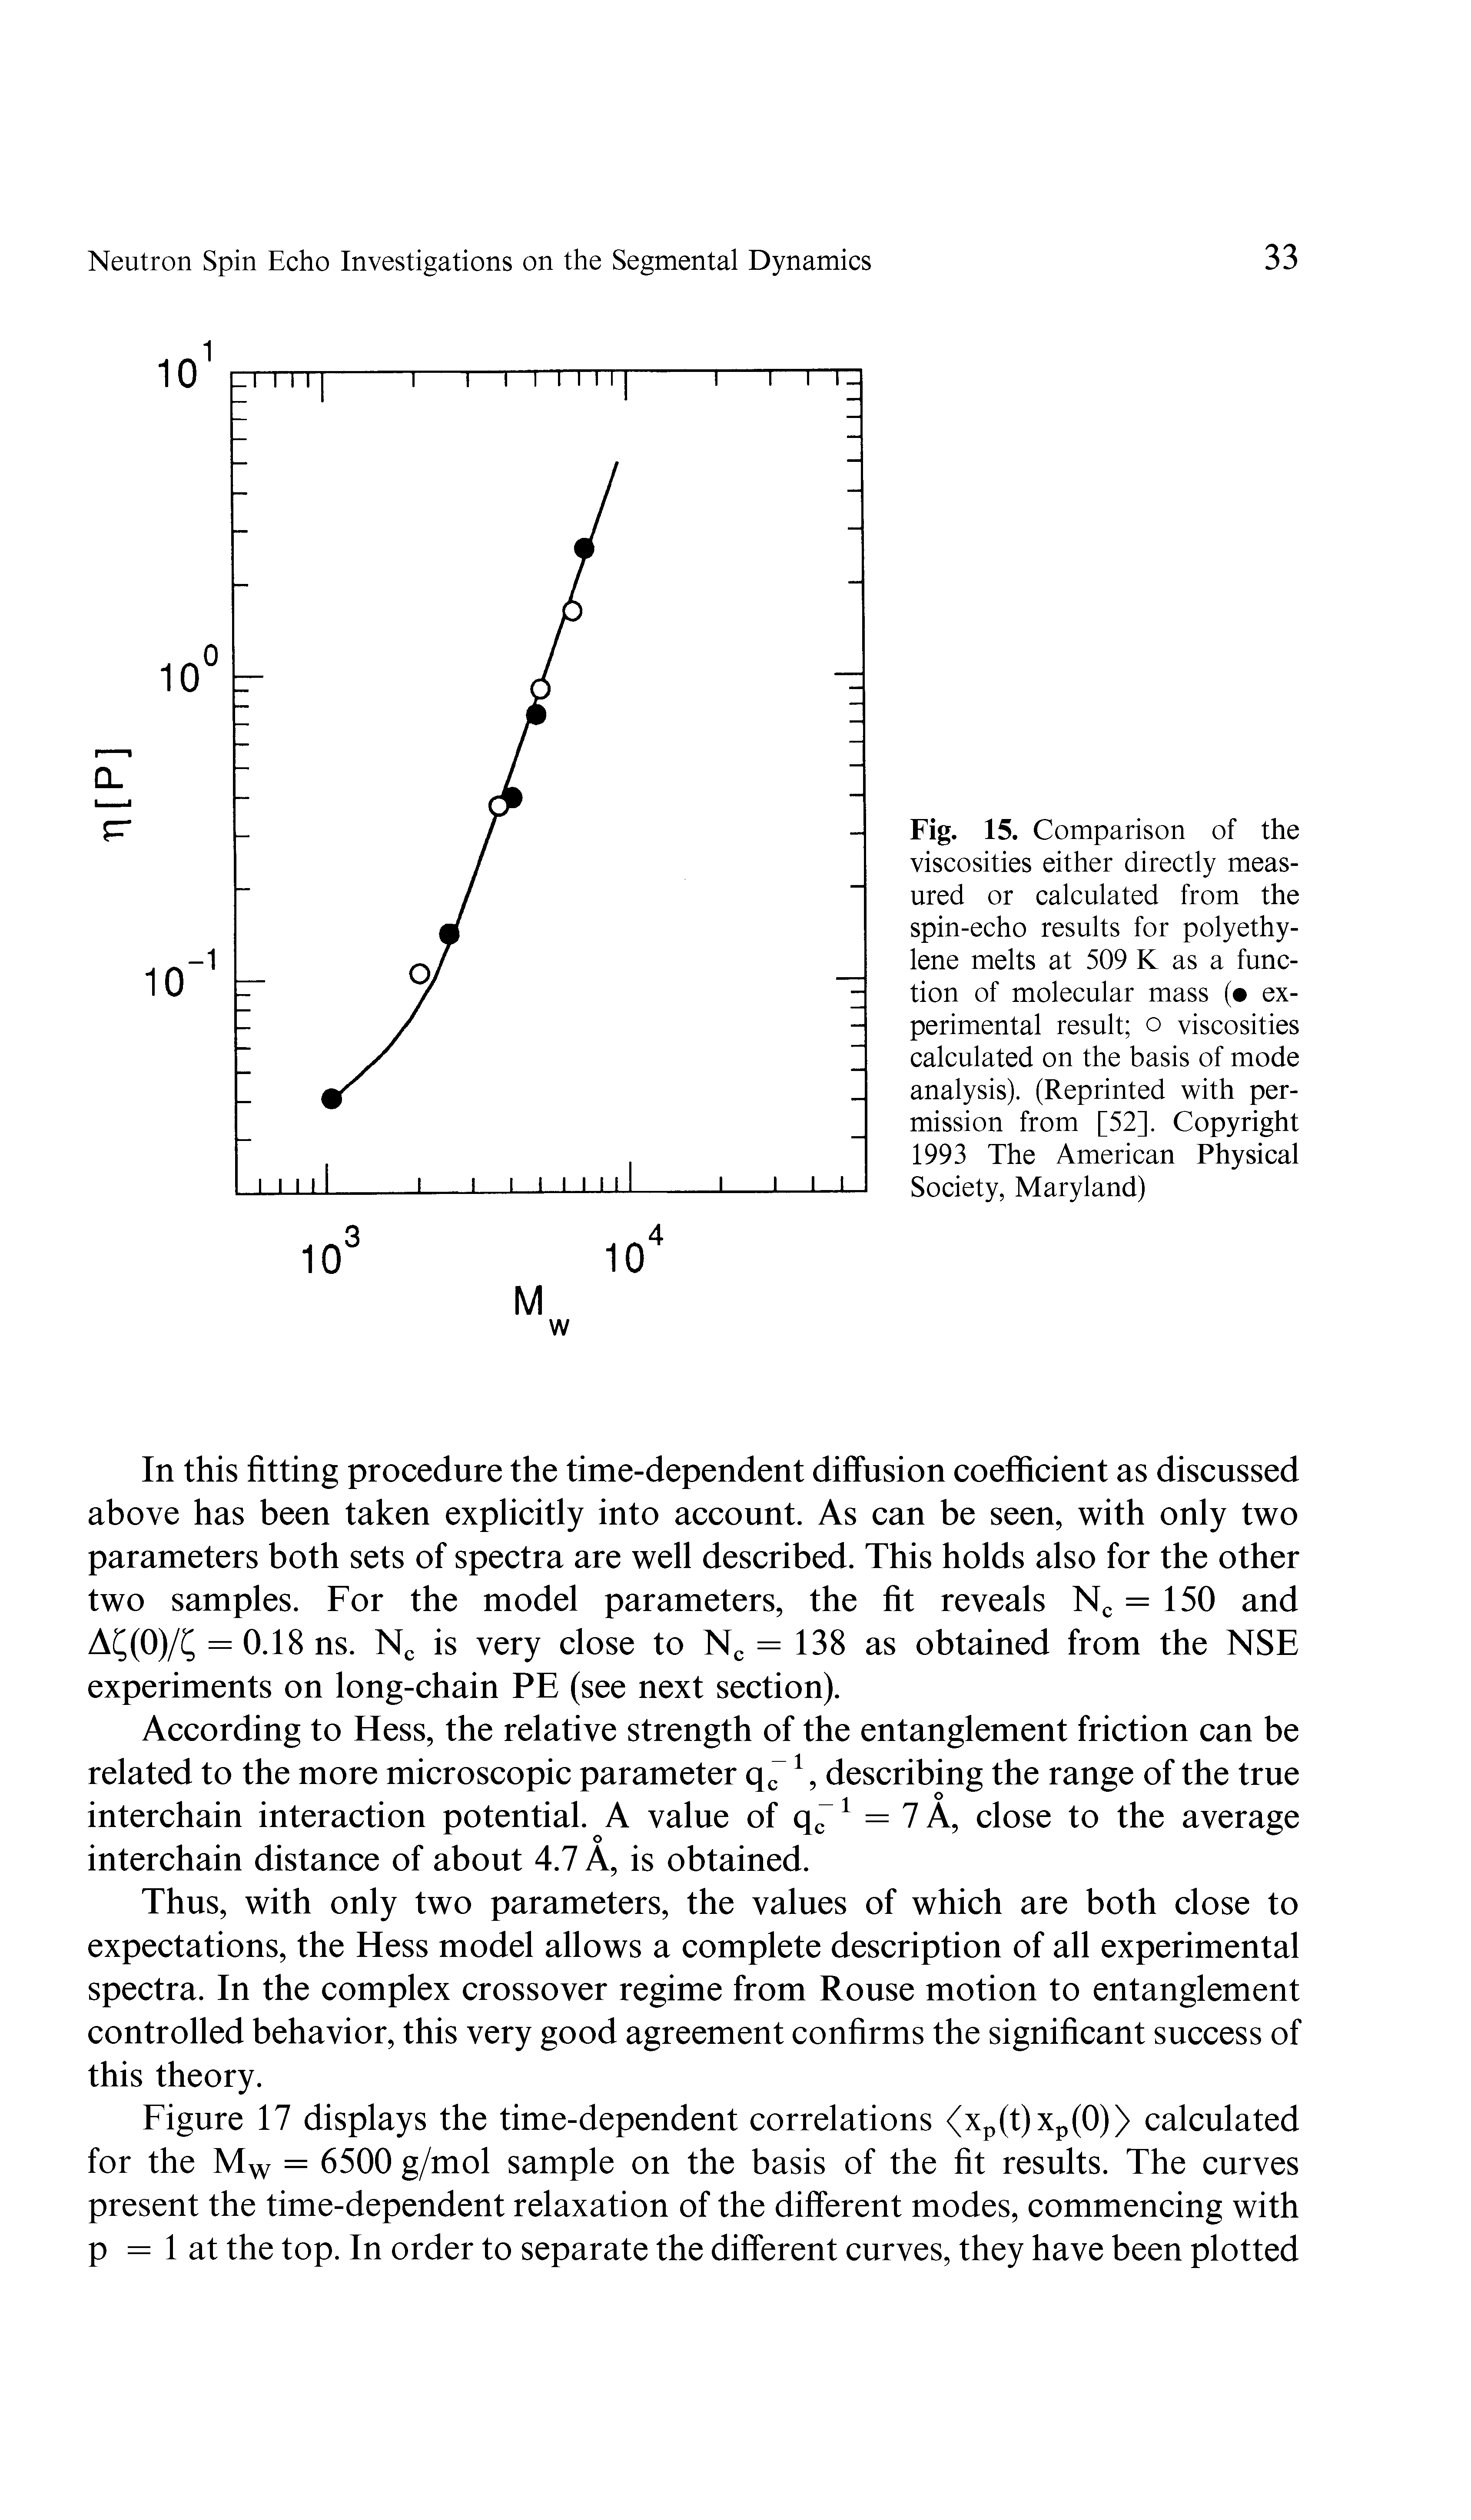 Fig. 15. Comparison of the viscosities either directly measured or calculated from the spin-echo results for polyethylene melts at 509 K as a function of molecular mass ( experimental result o viscosities calculated on the basis of mode analysis). (Reprinted with permission from [52]. Copyright 1993 The American Physical Society, Maryland)...